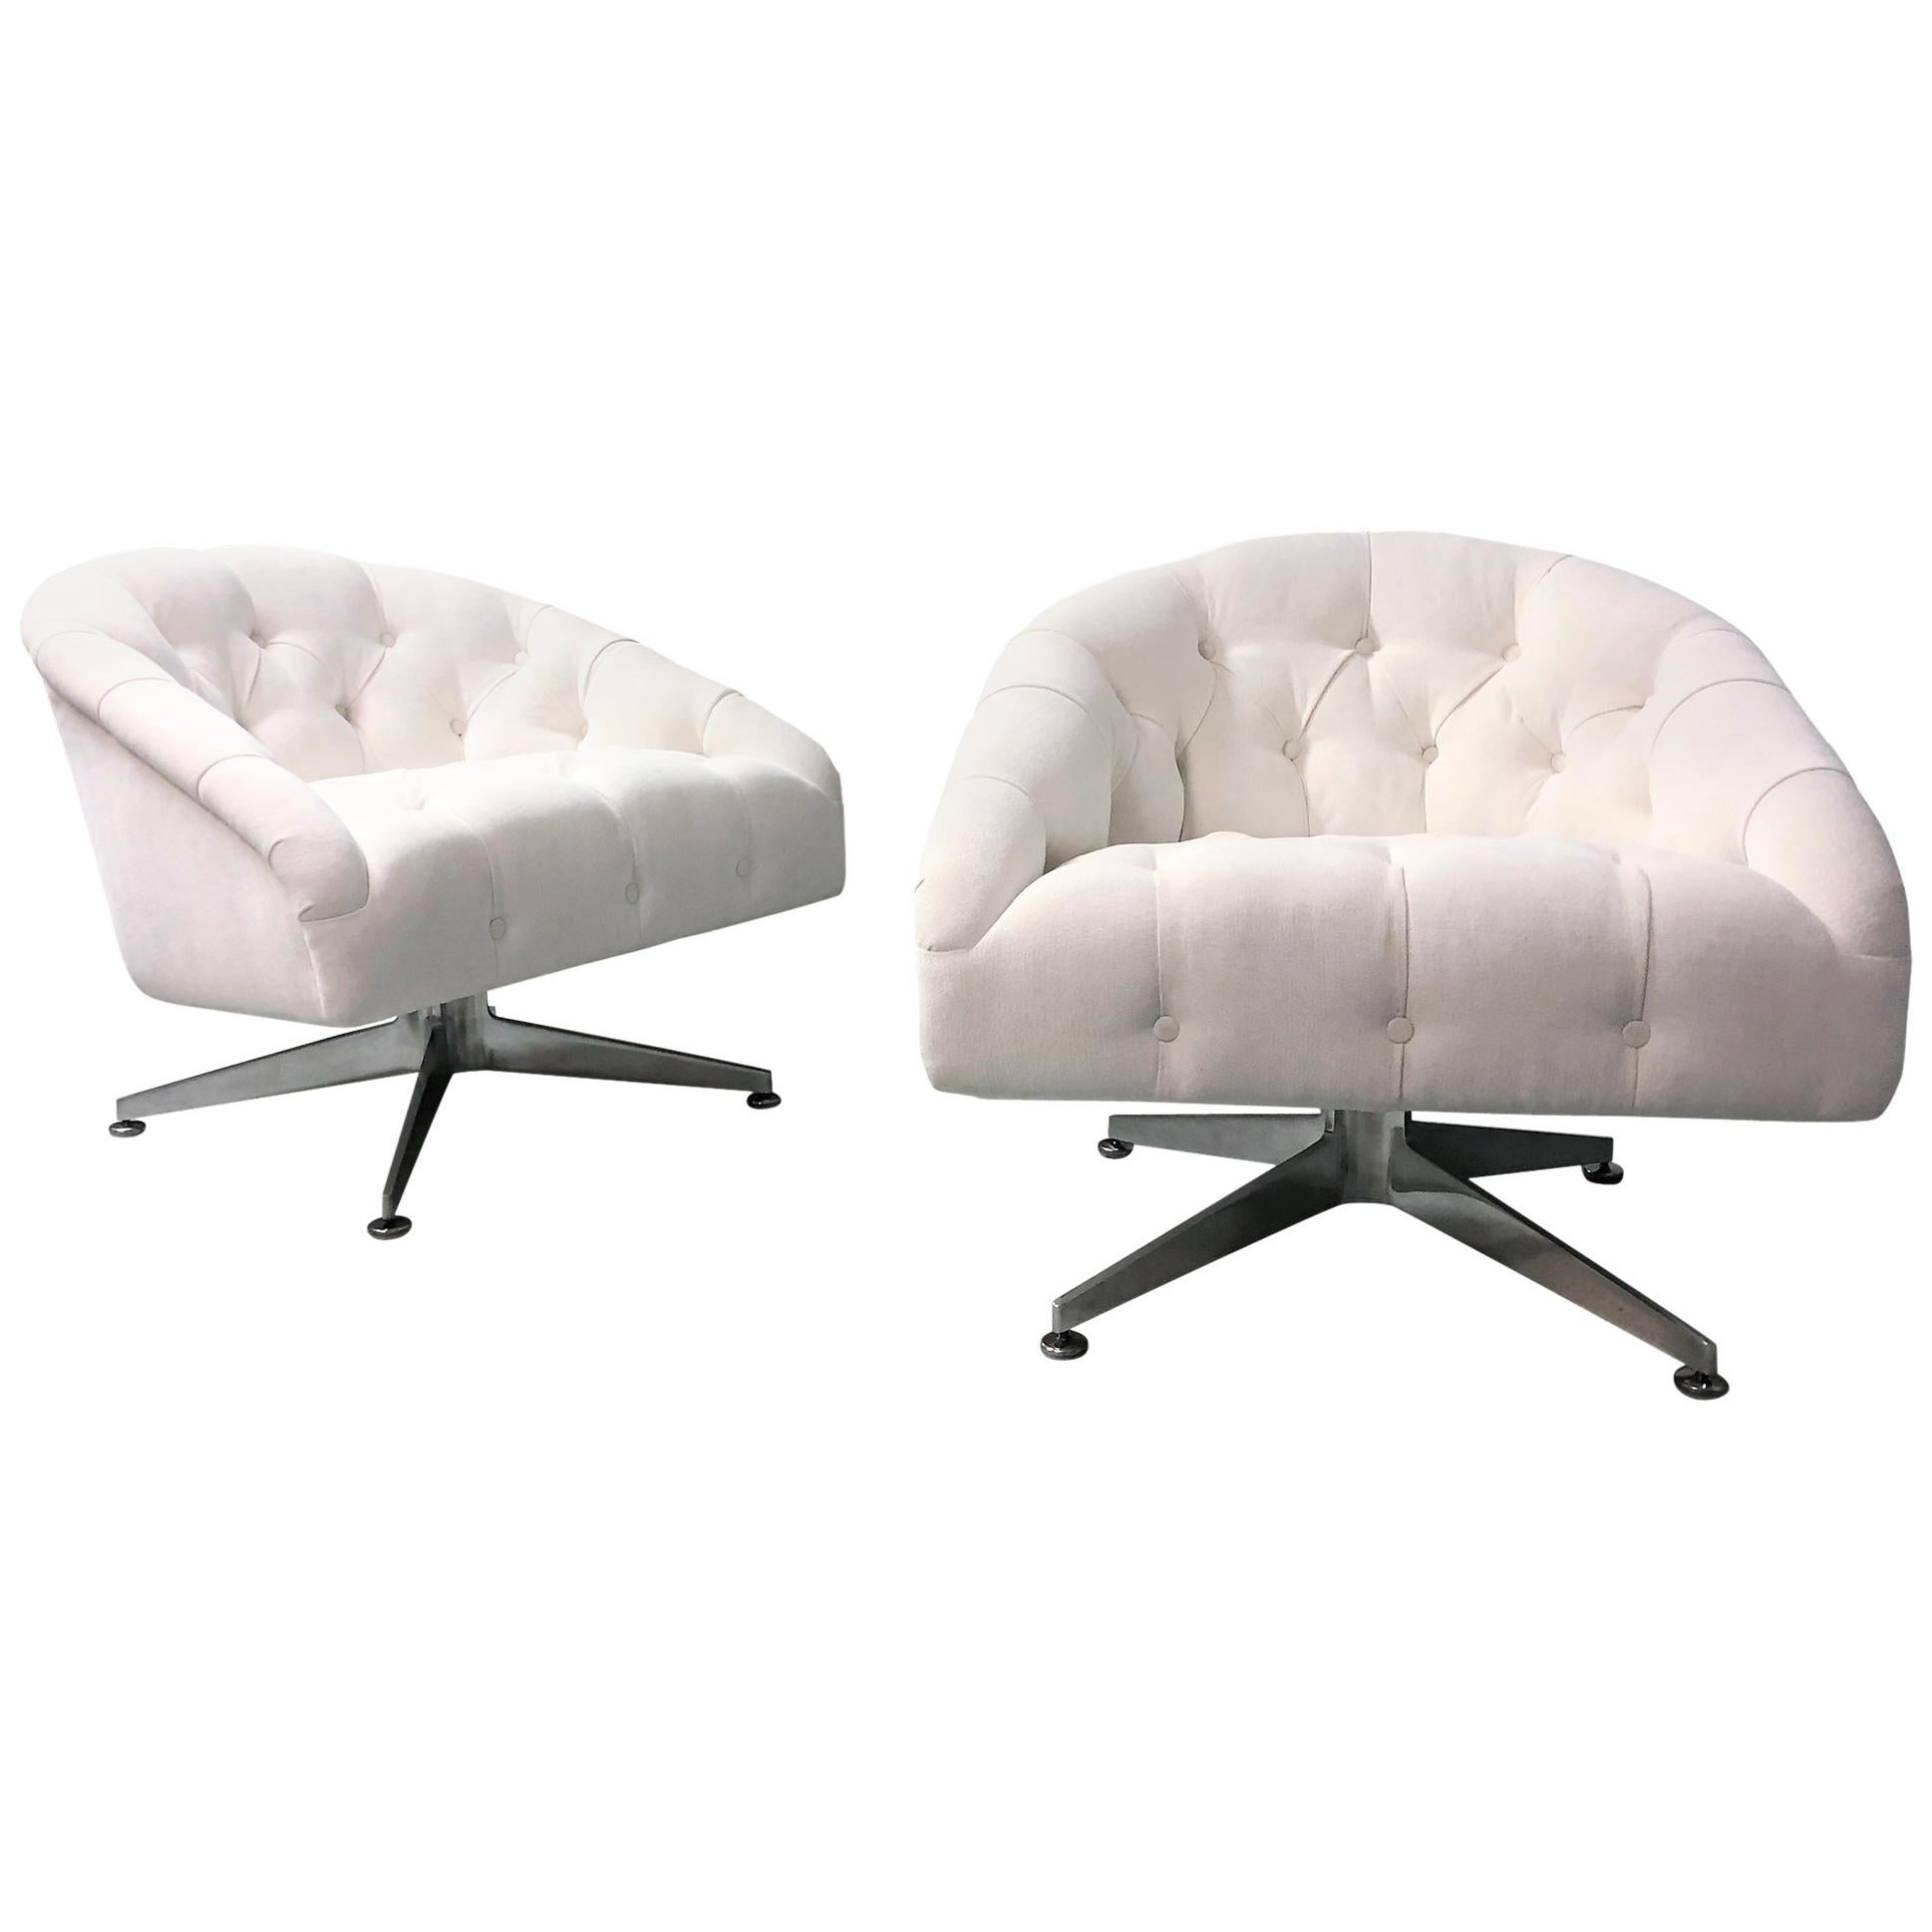 Ward Bennett Pair of Tufted Lounge Swivel Chairs, 1960s